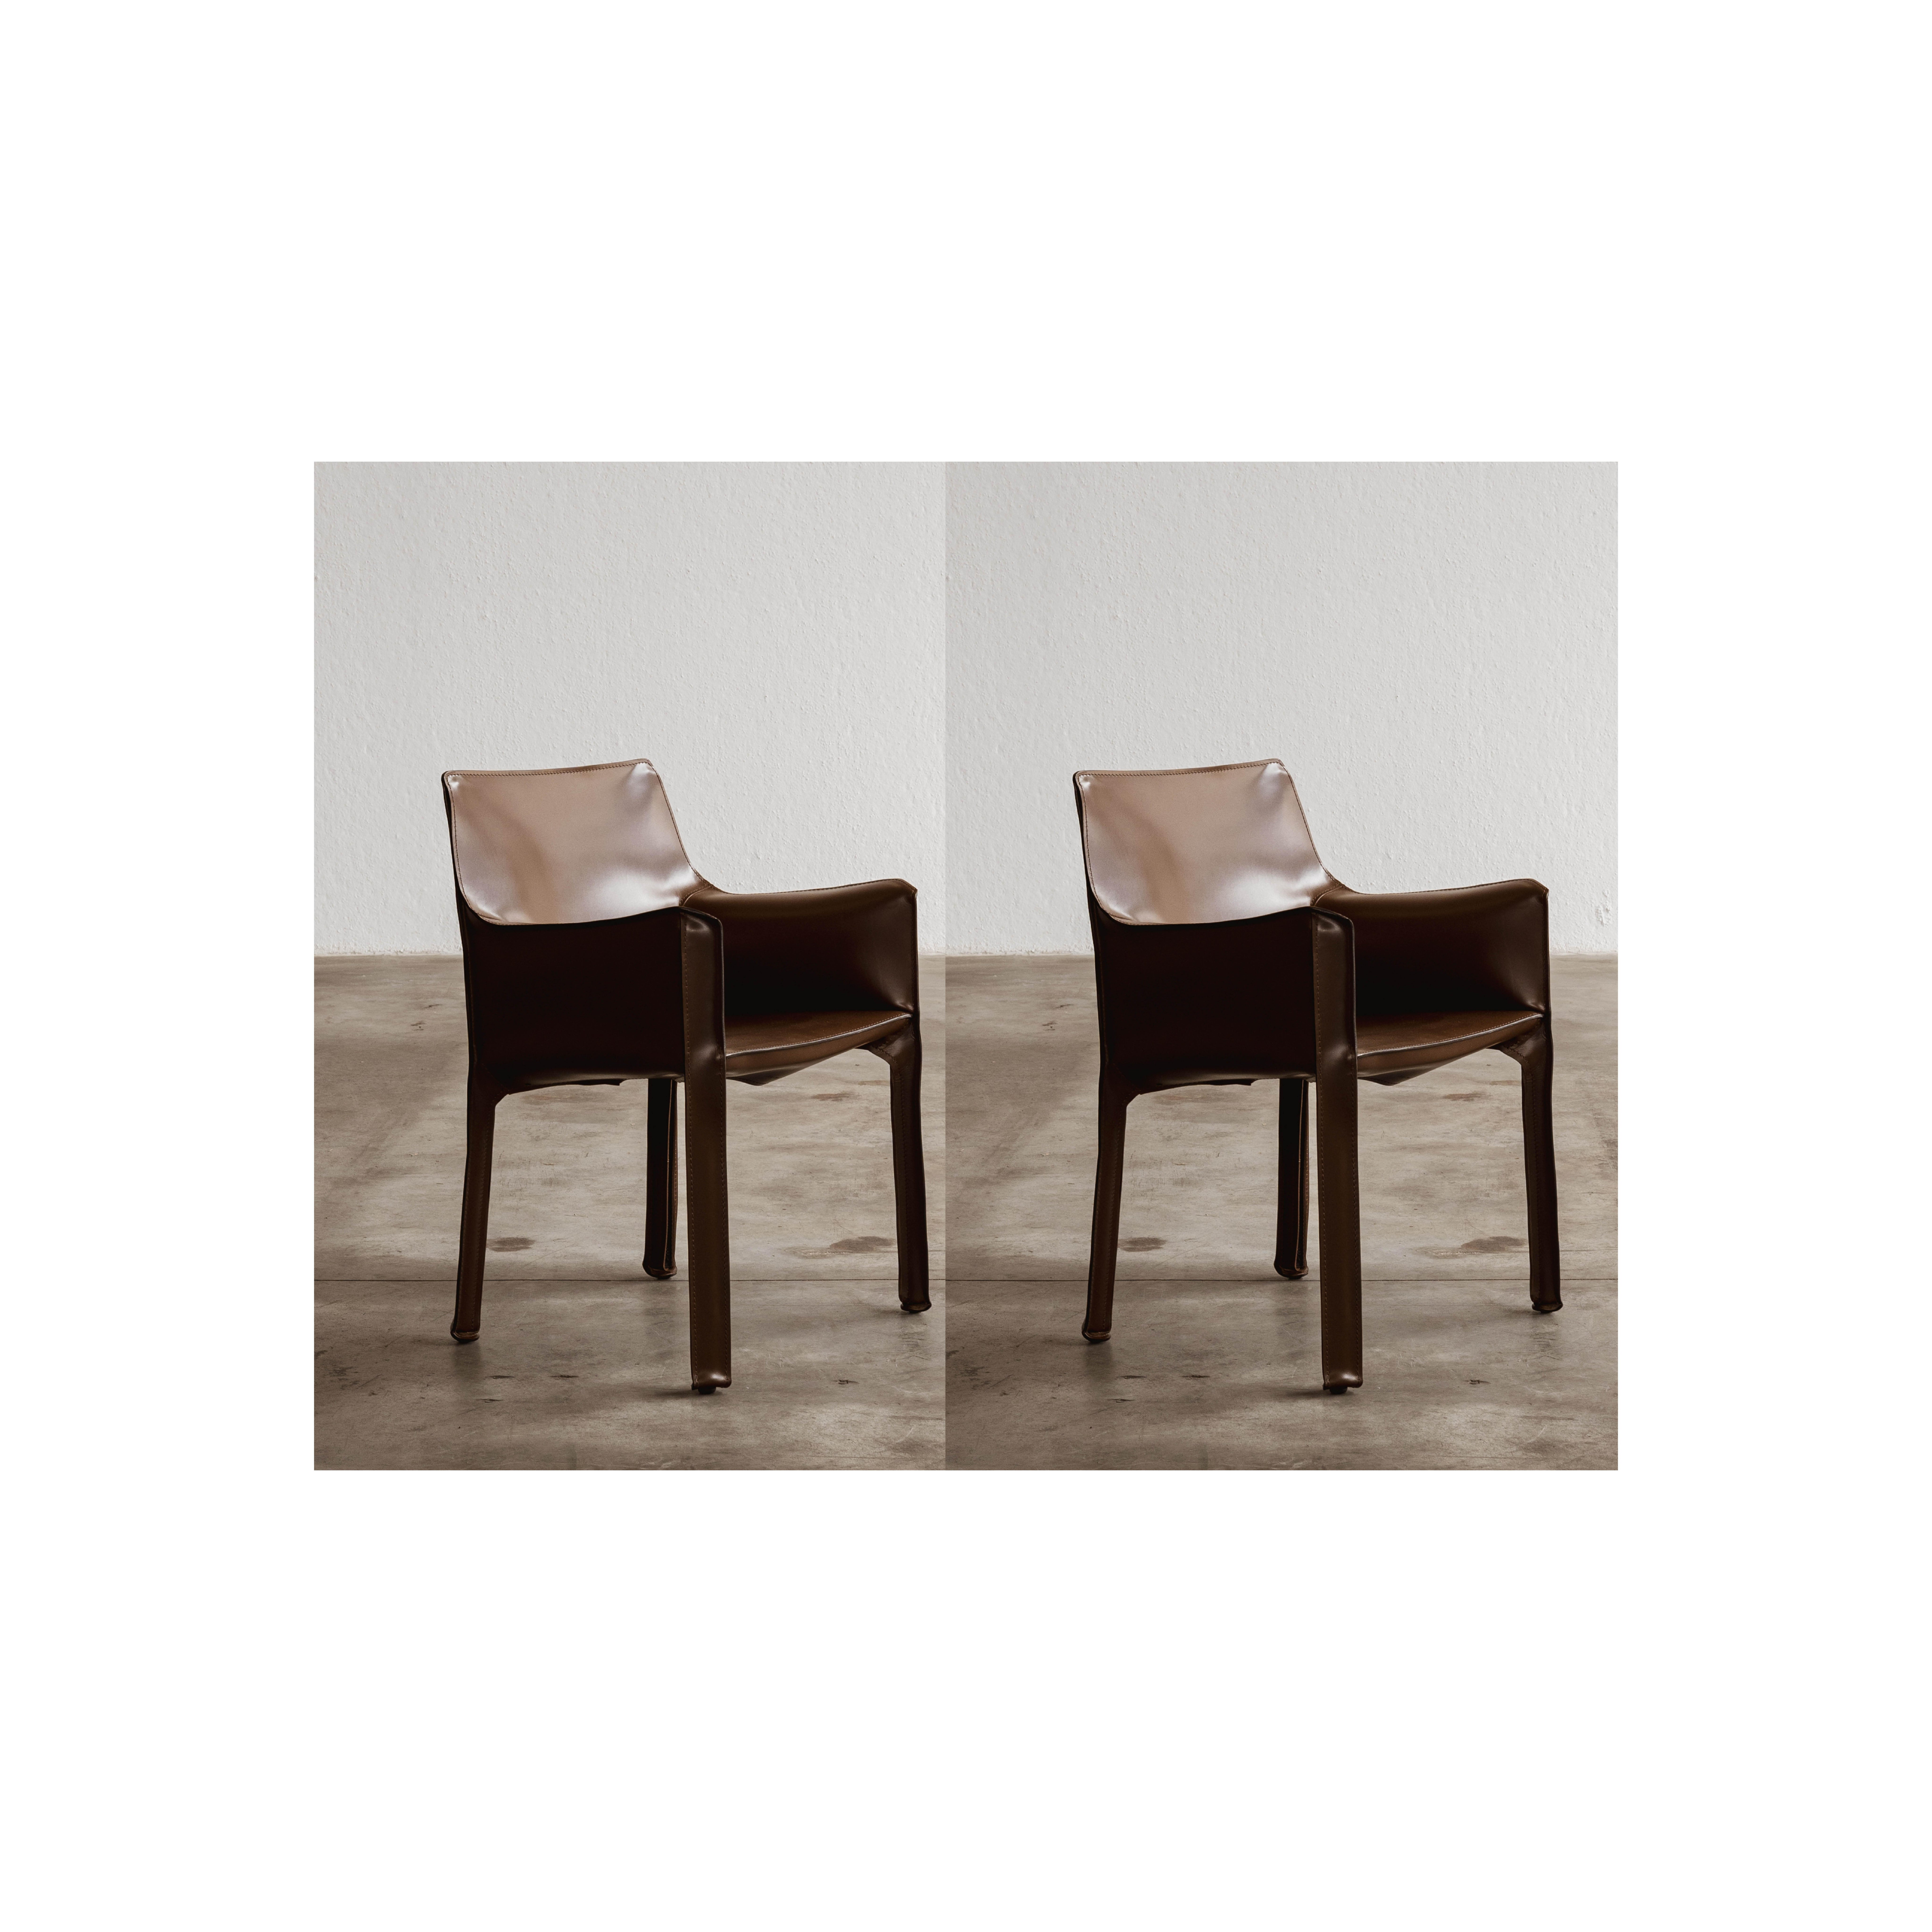 Mario Bellini "CAB 413" Chairs for Cassina in Dark Brown, 1977, Set of 2 For Sale